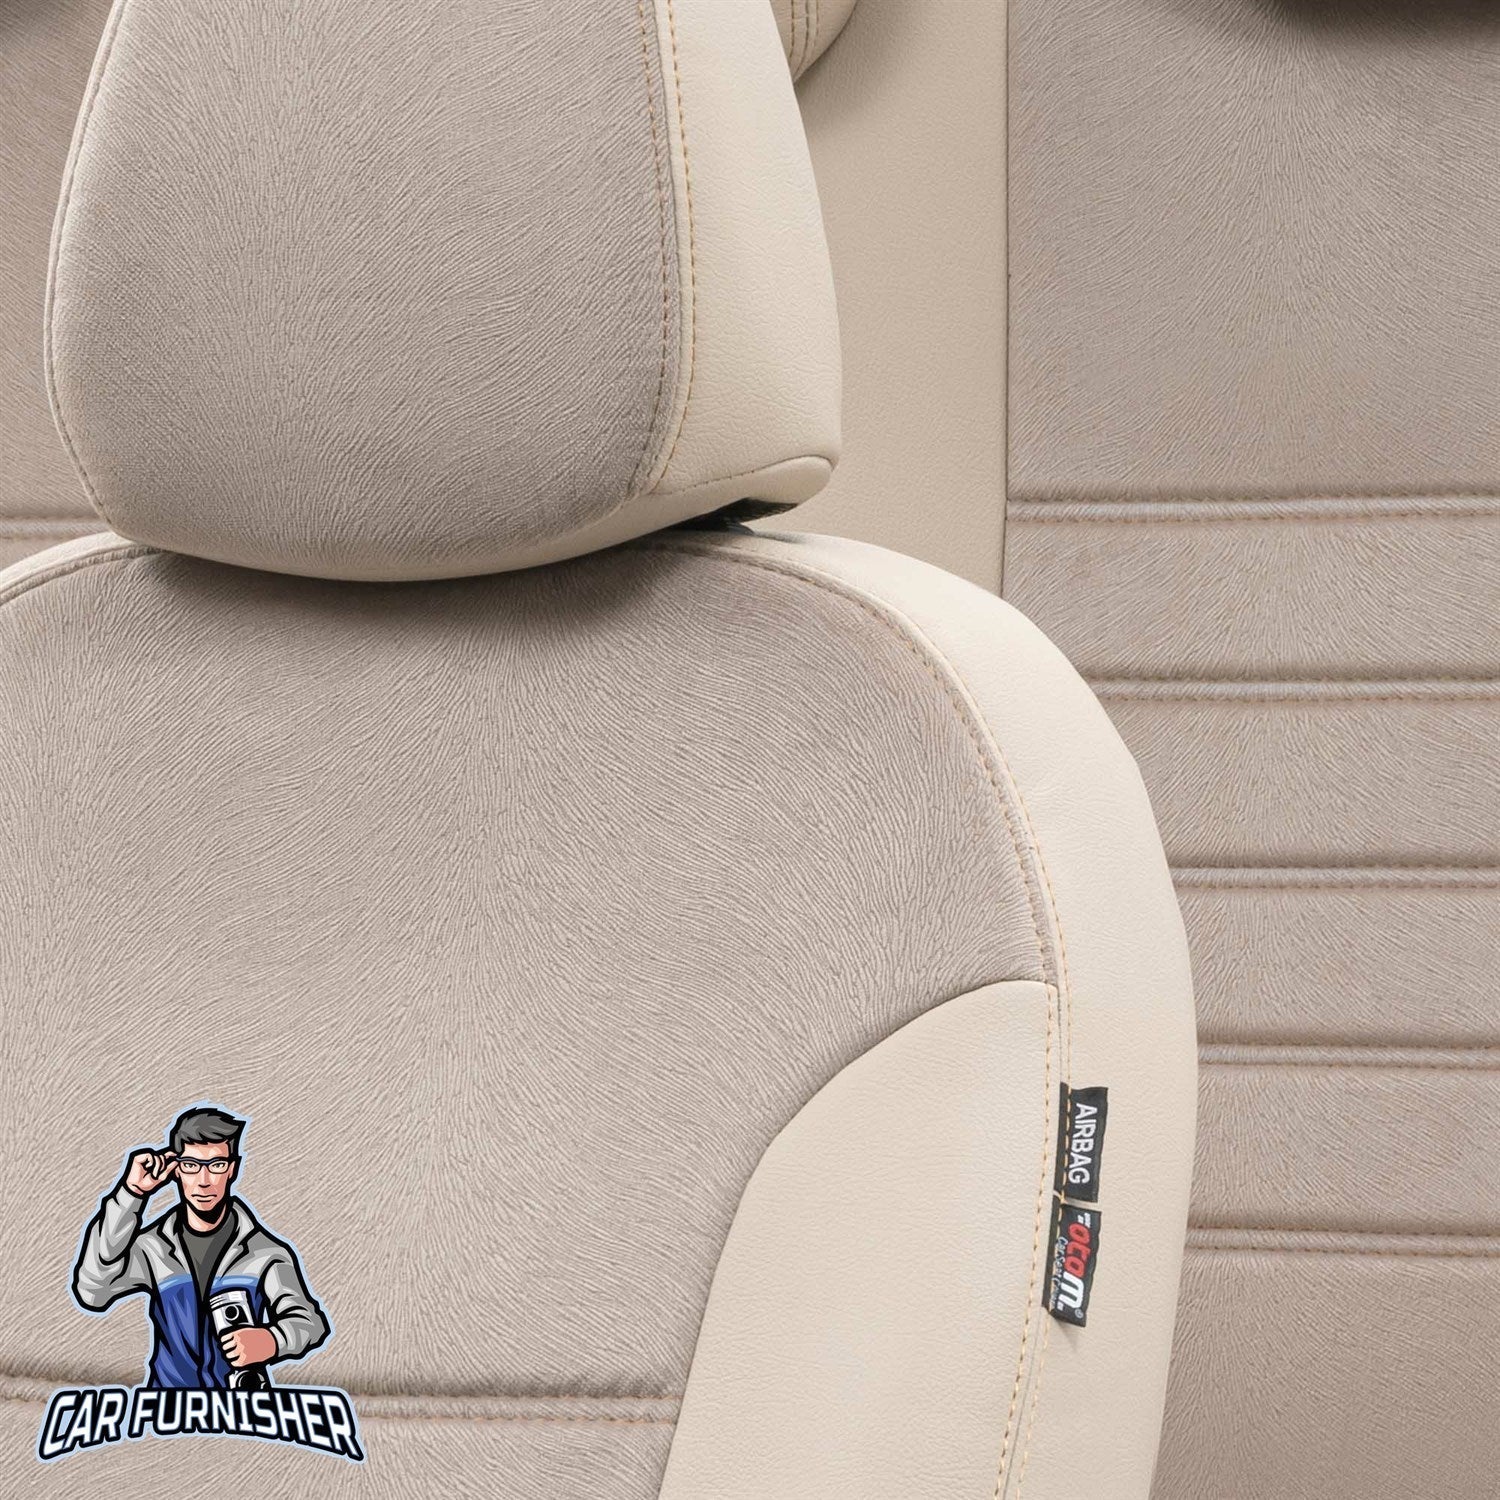 Renault 19 Seat Cover London Foal Feather Design Beige Leather & Foal Feather